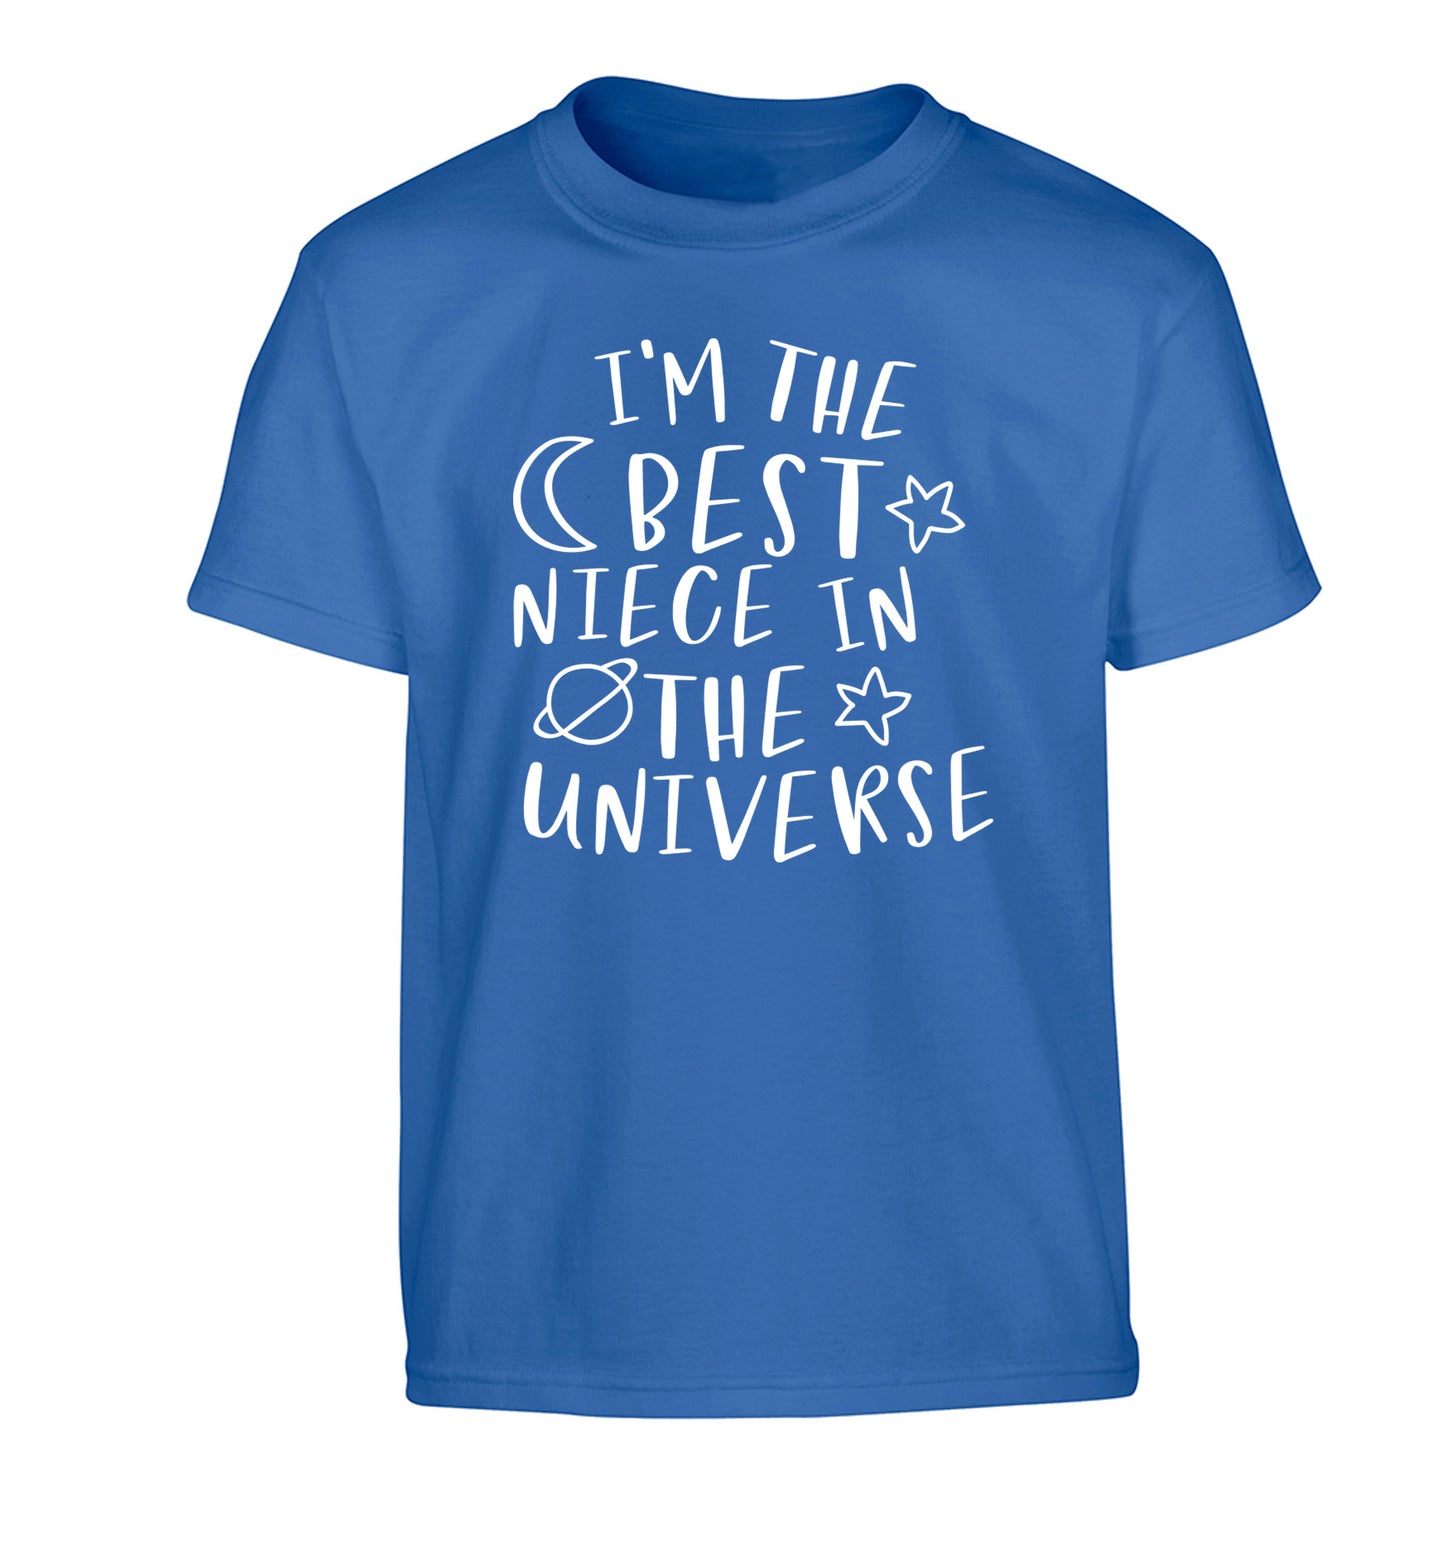 I'm the best niece in the universe Children's blue Tshirt 12-13 Years